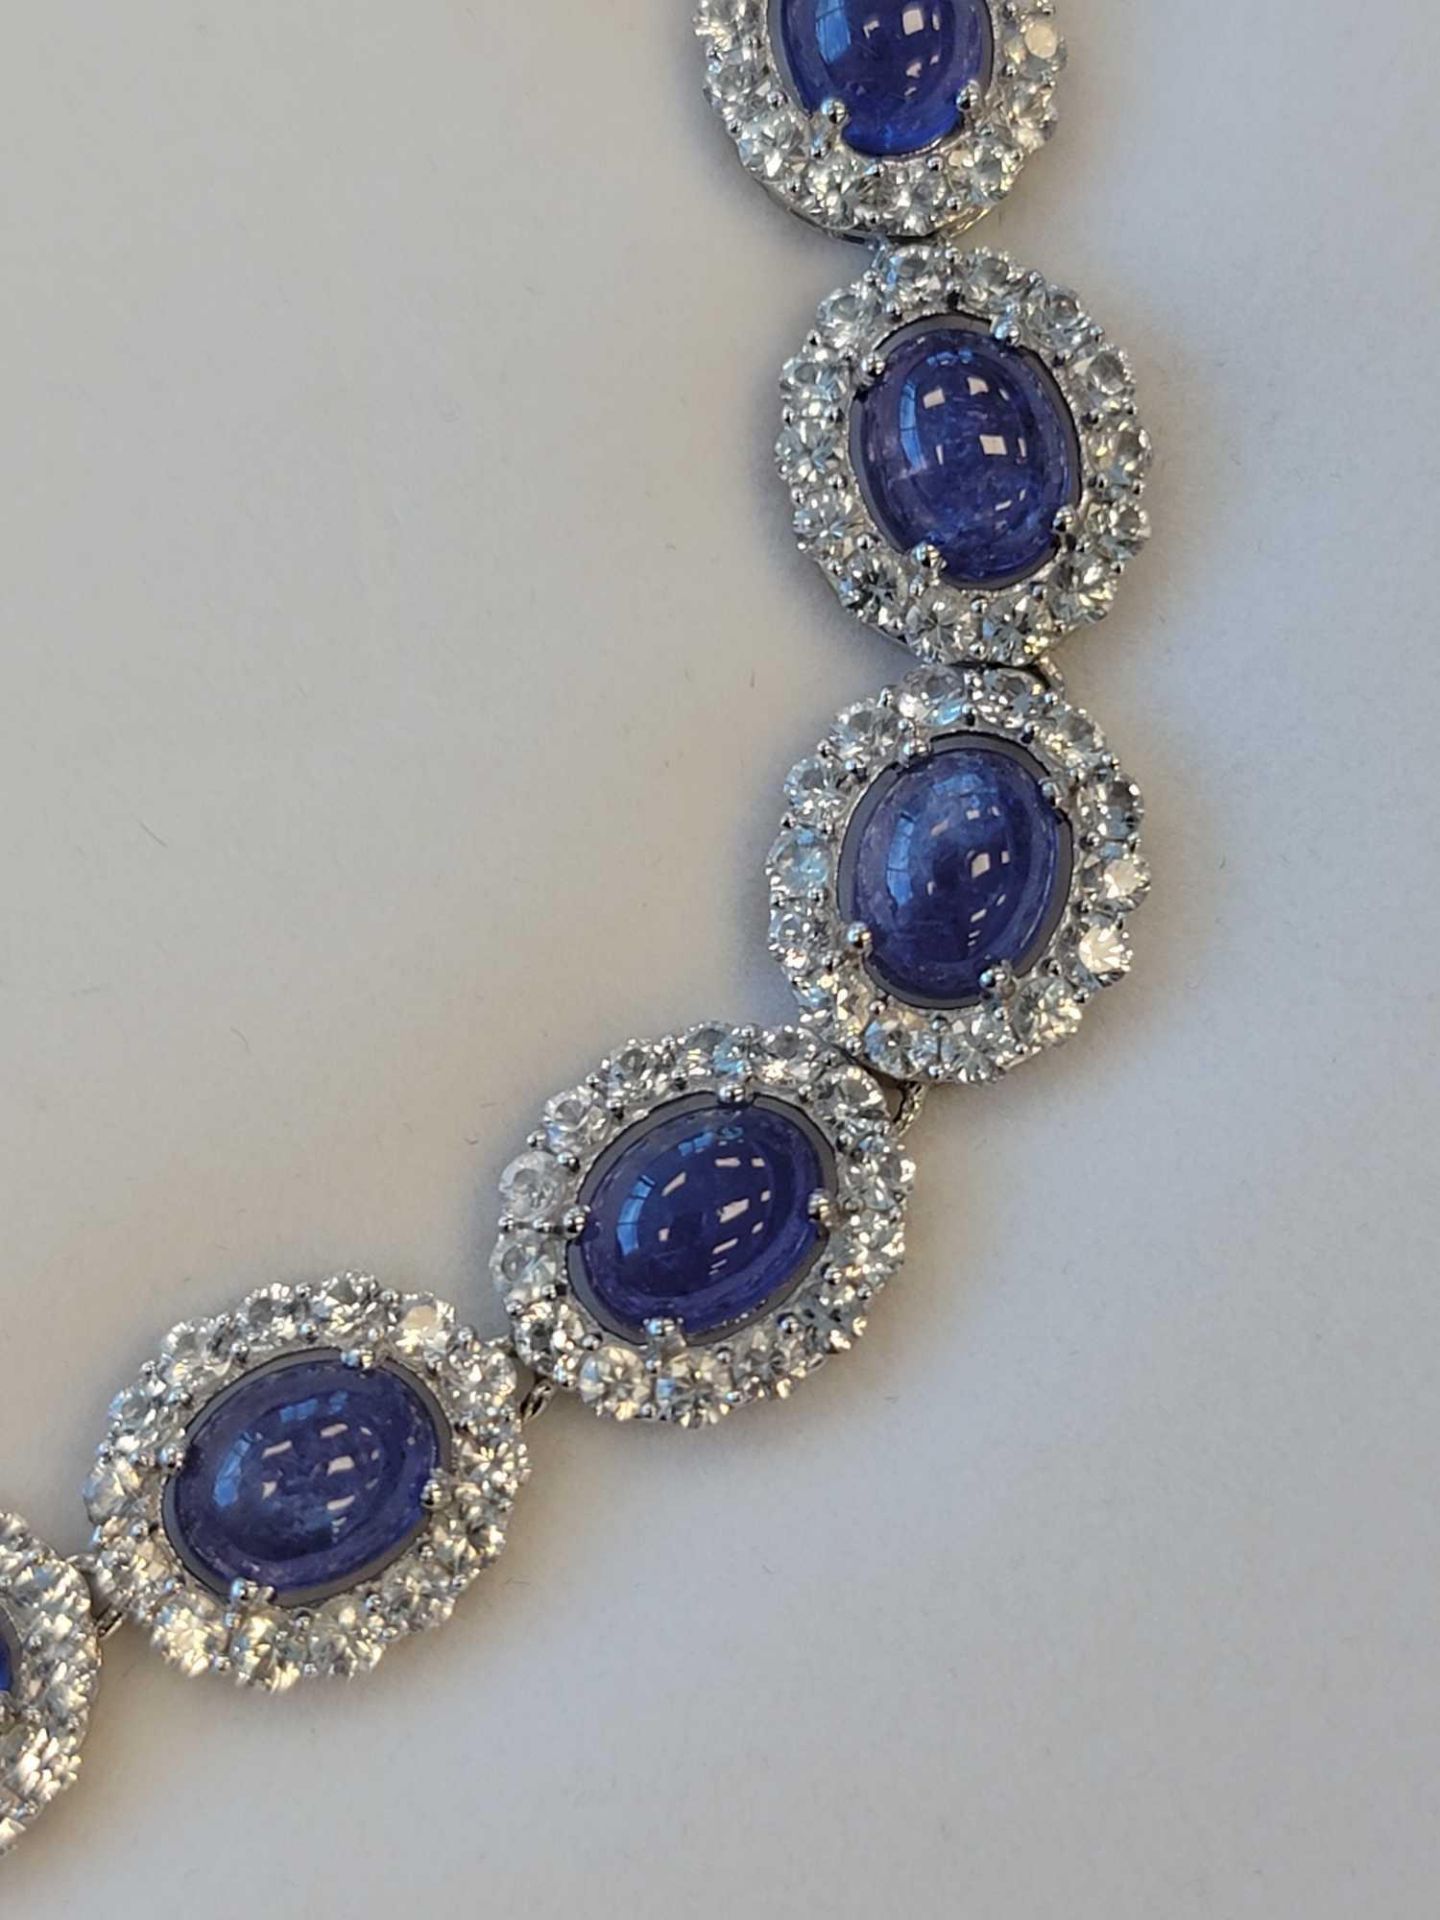 Tanzanite and Colorless Sapphire Necklace - Image 5 of 7